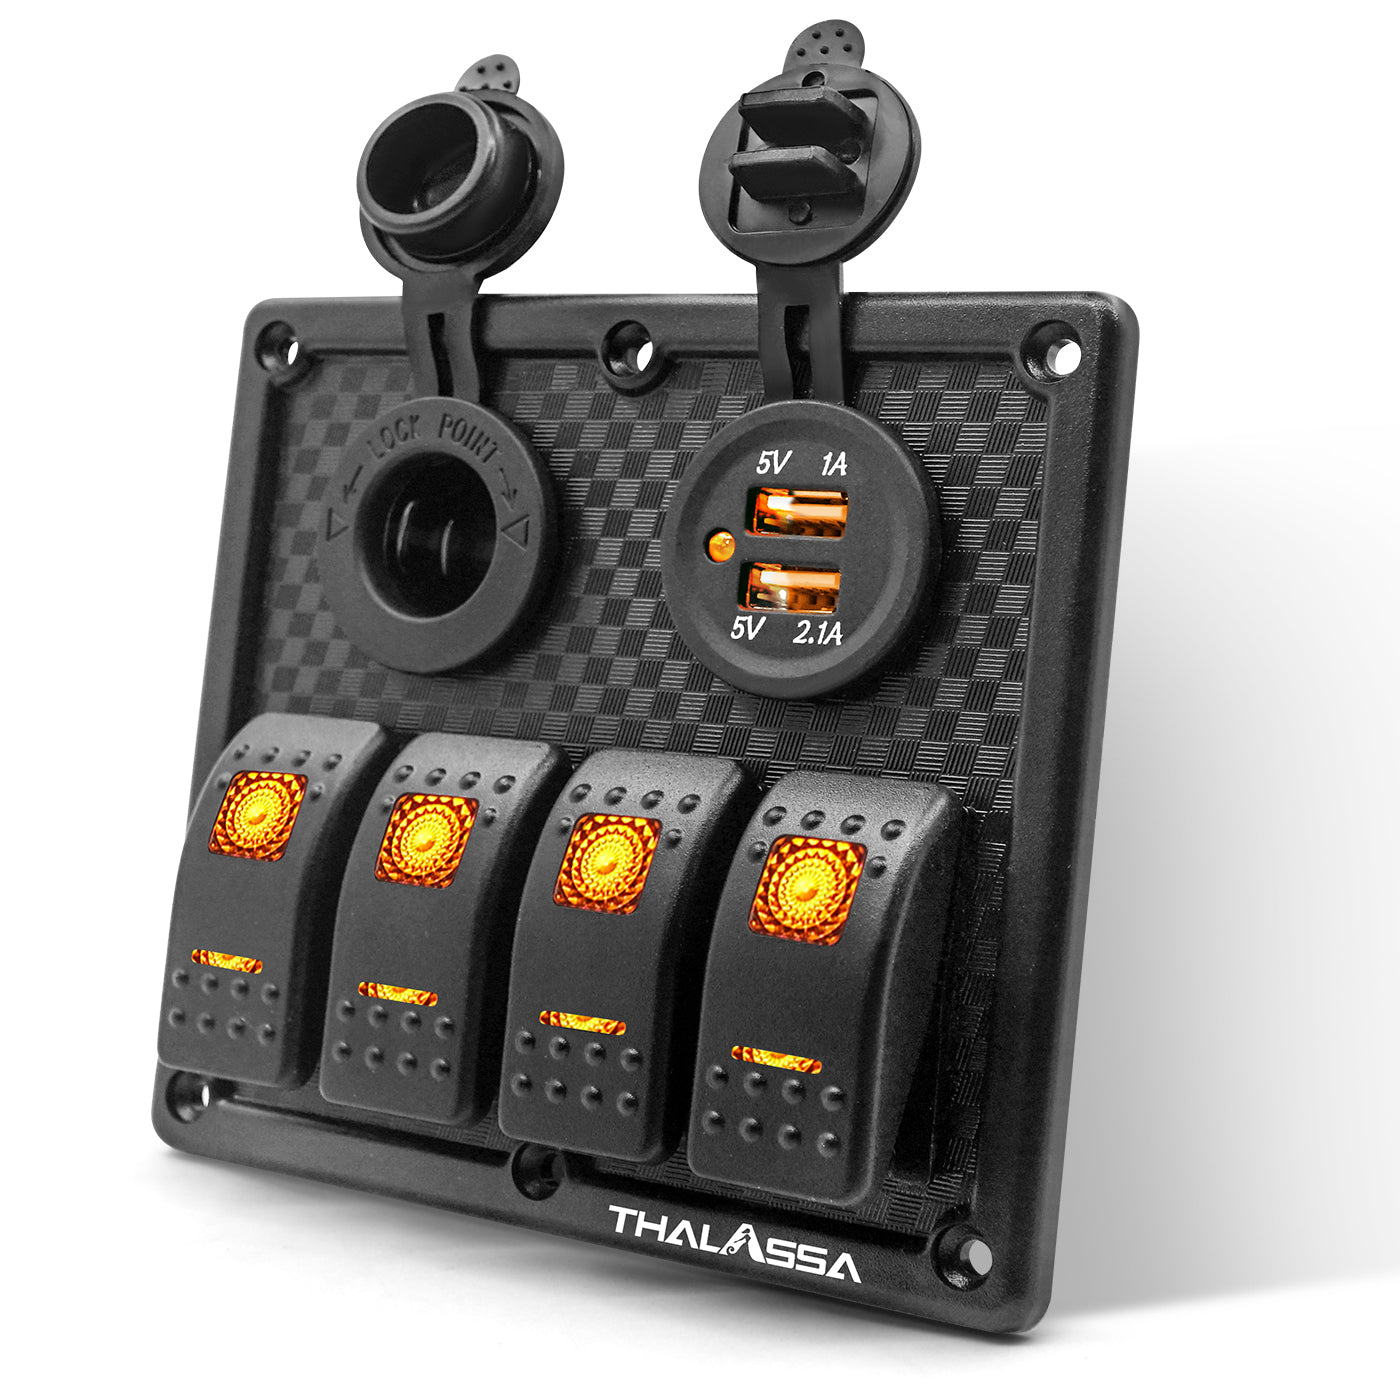 THALASSA 4 Gang Waterproof Marine Boat Rocker Switch Panel, 3.1A Dual USB Outlet and 12V DC Power Socket with 15A Fuse, Orange Indicator Light Used for RV Car Truck Rv Vehicles Yacht